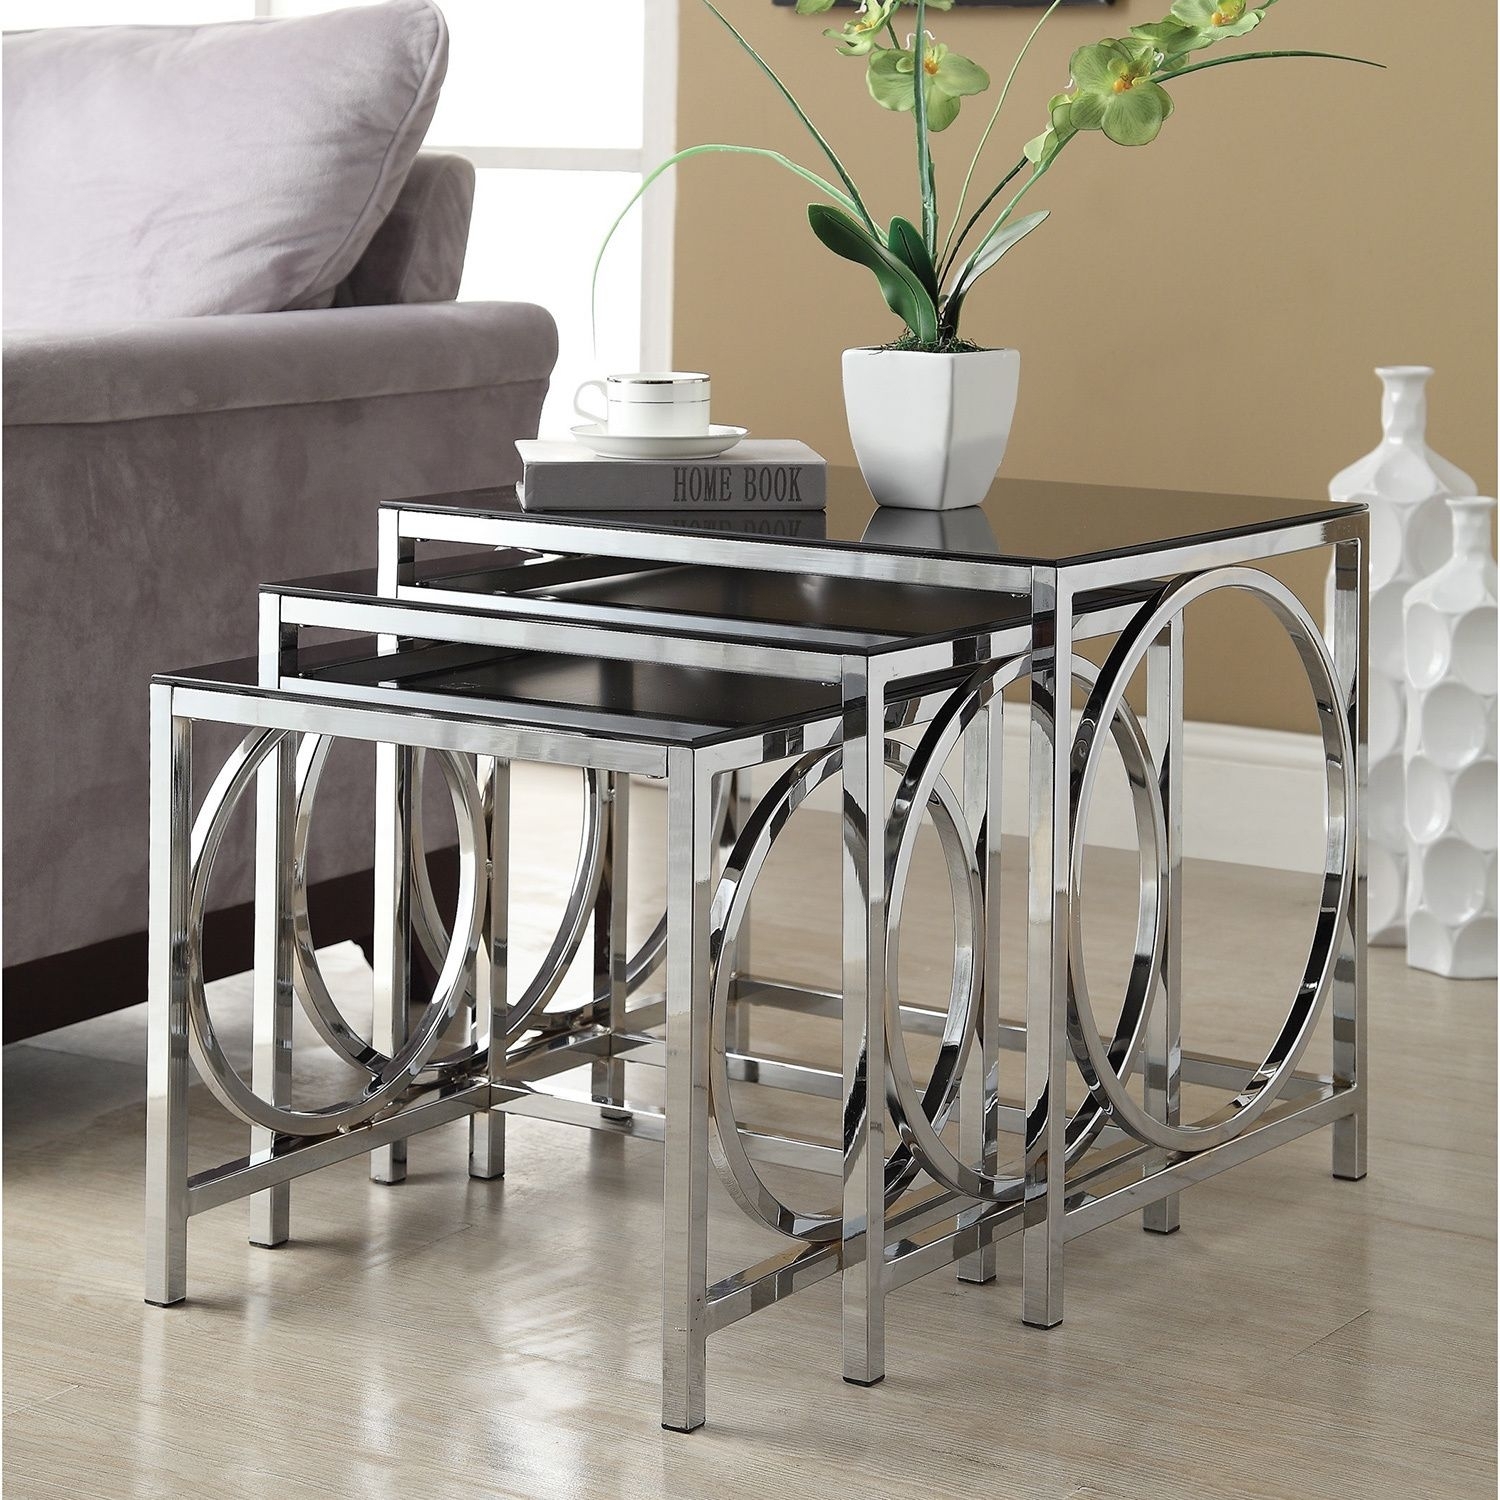 Ainpecca Nest of Tables Marble Effect Glass Top Square Side End Tables Chrome Metal Legs Black, marble effect glass top 